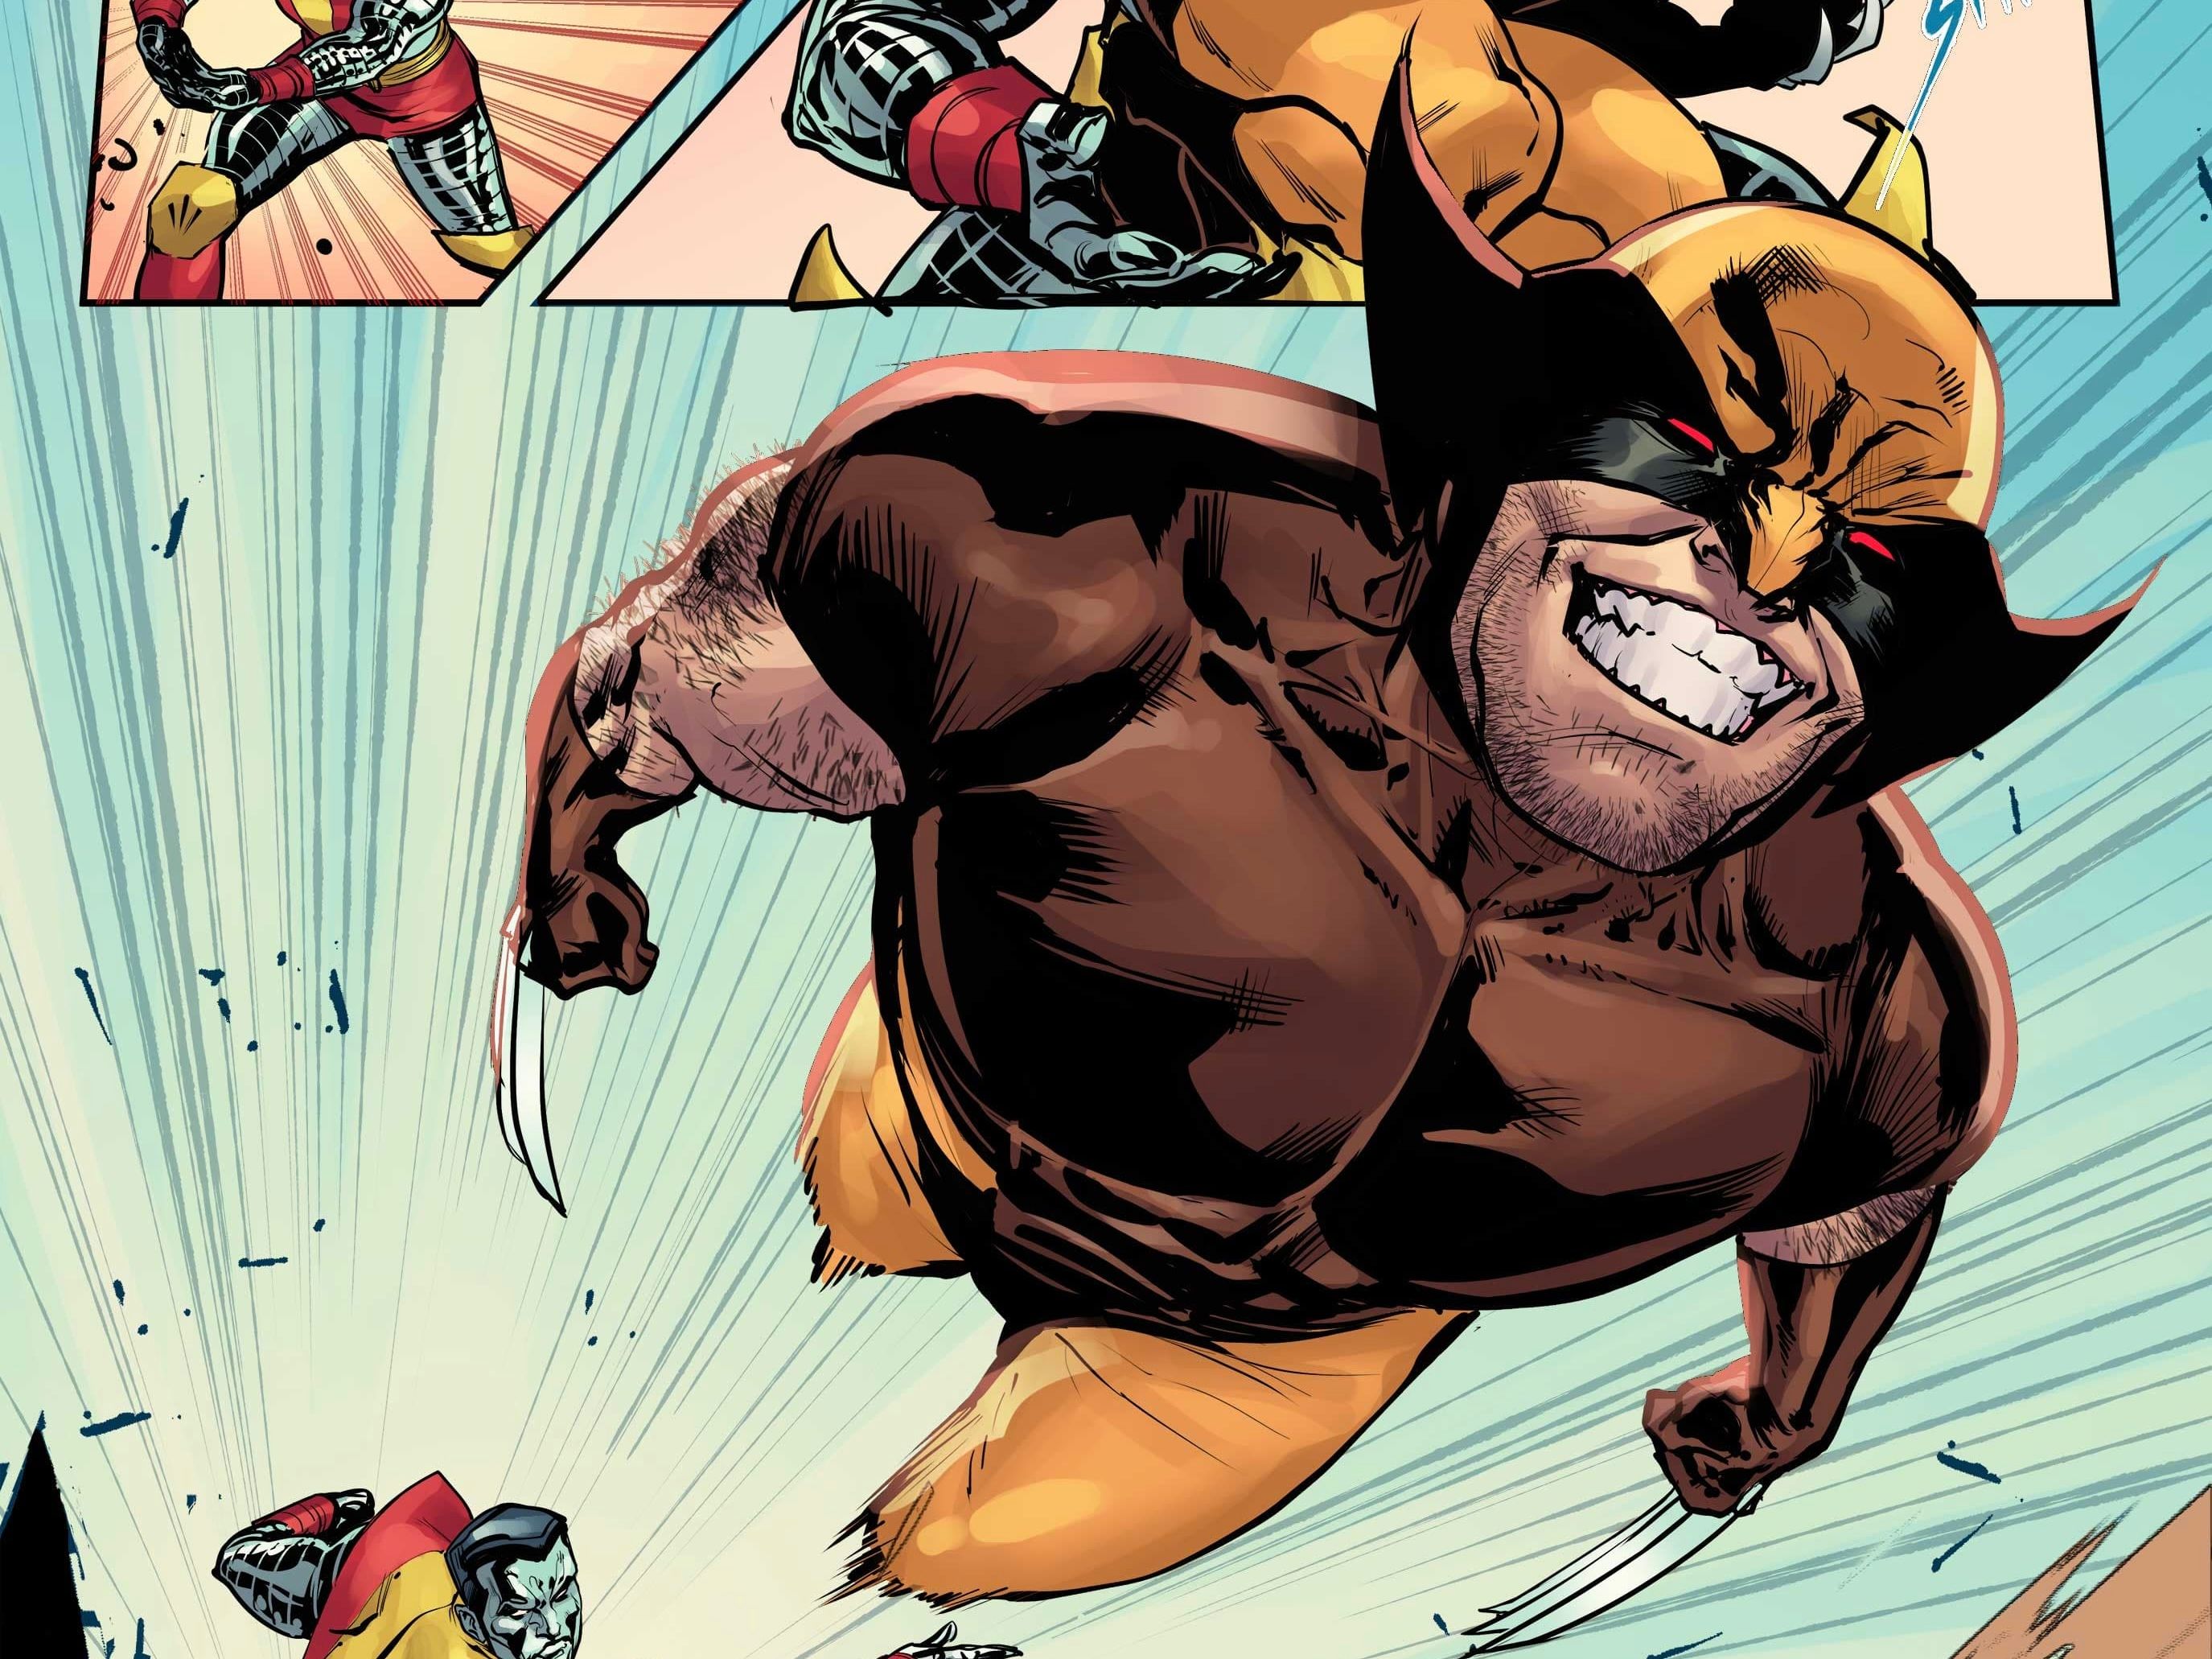 Colossus throws Wolverine with a fastball special.